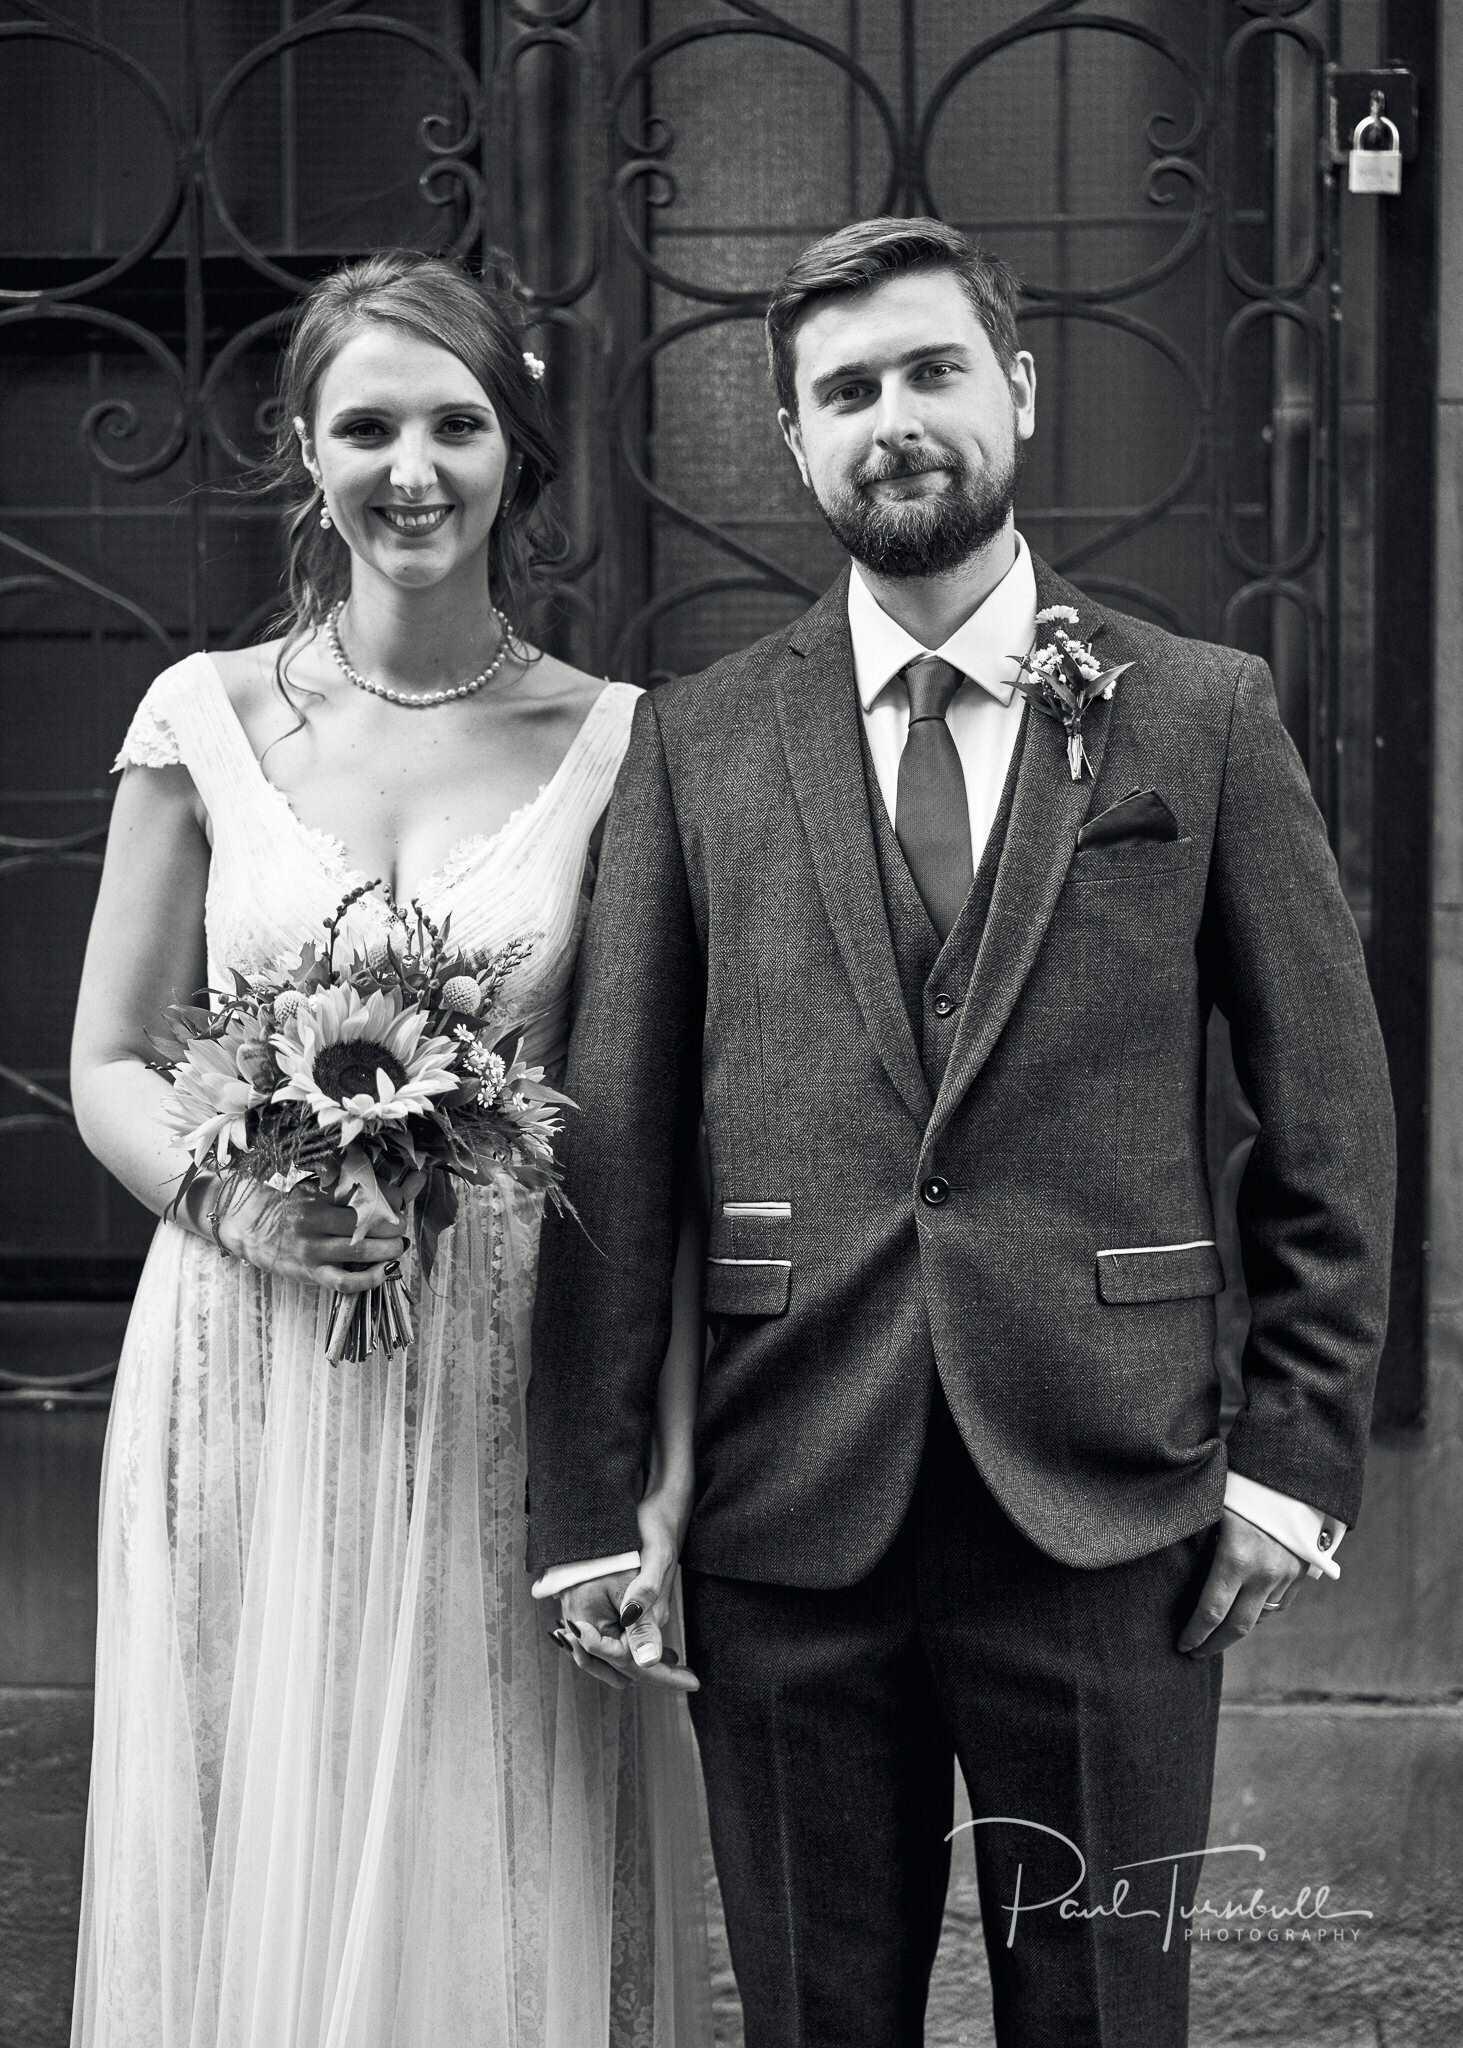 Newlyweds Portrait in Sheffield City Centre. Wedding Photography at Sheffield Town Hall